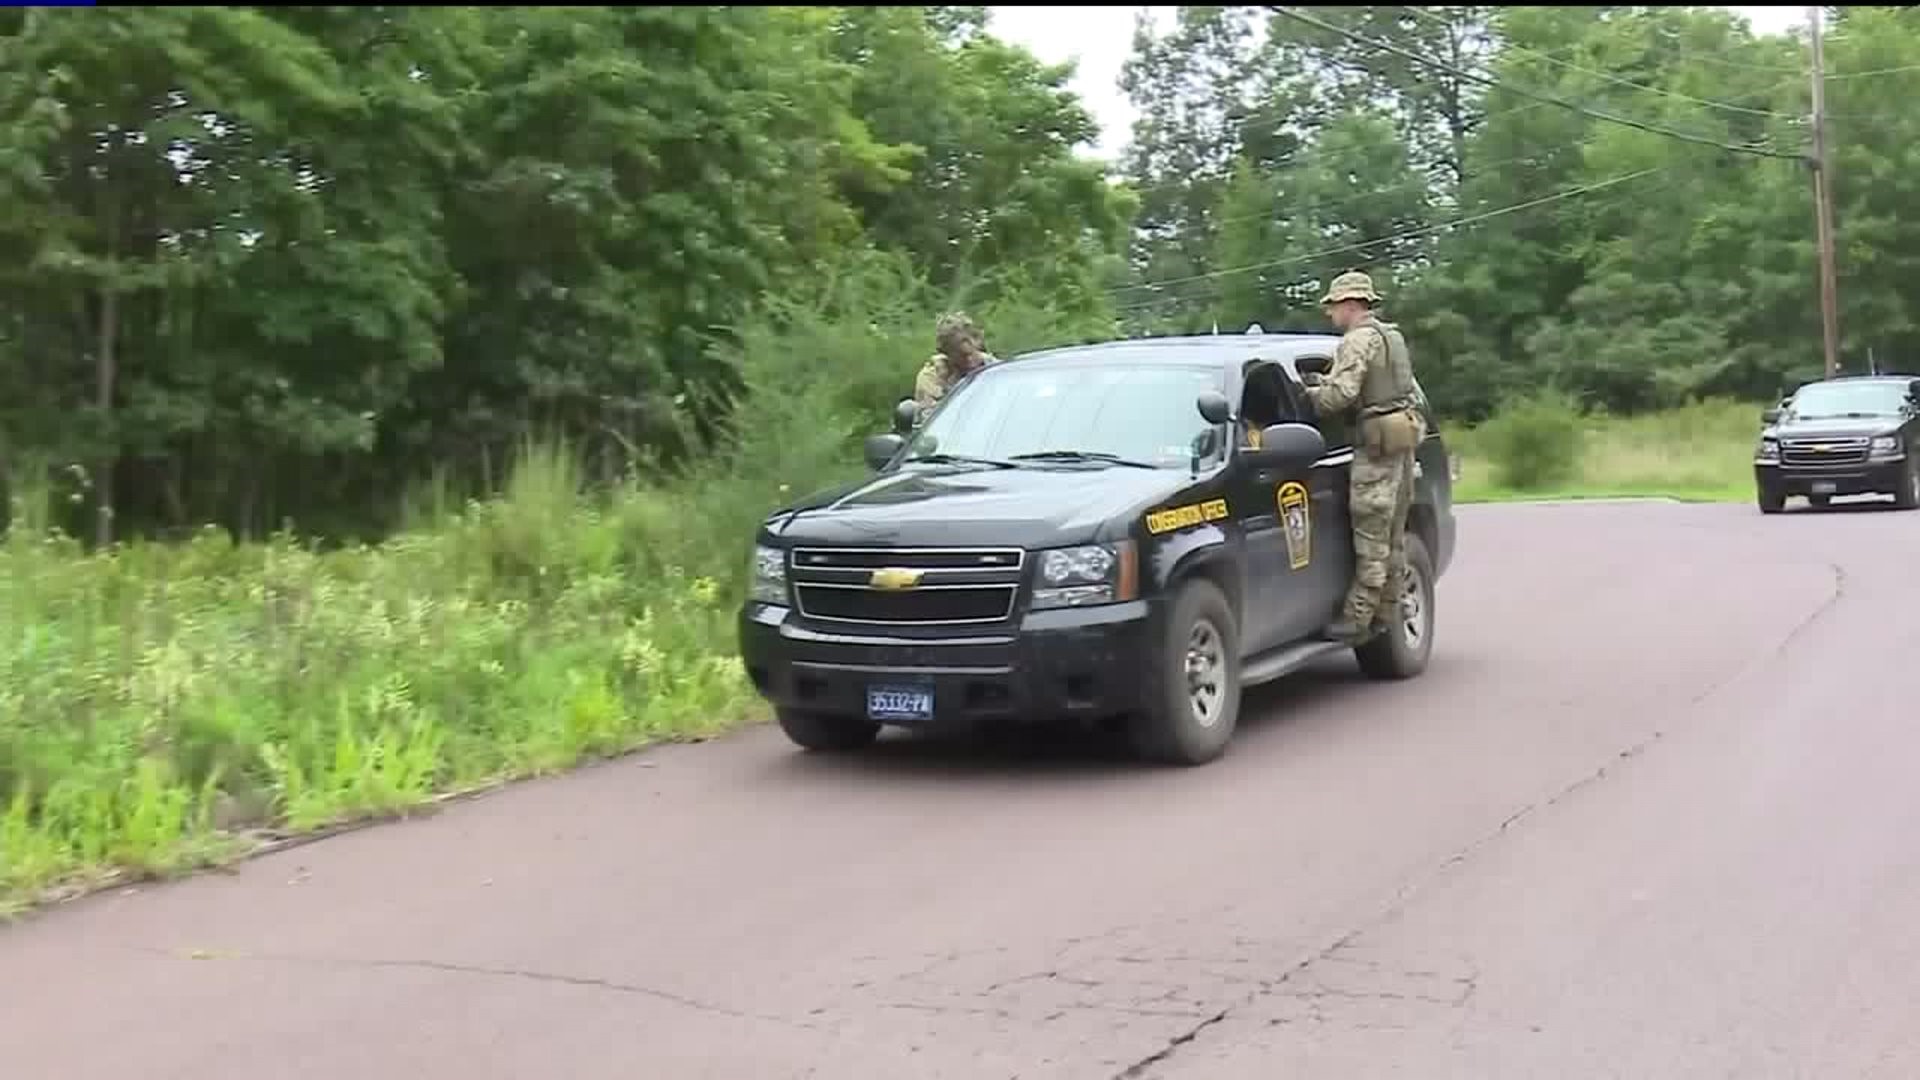 Hunt for Fugitive Shawn Christy Returns to Schuylkill County